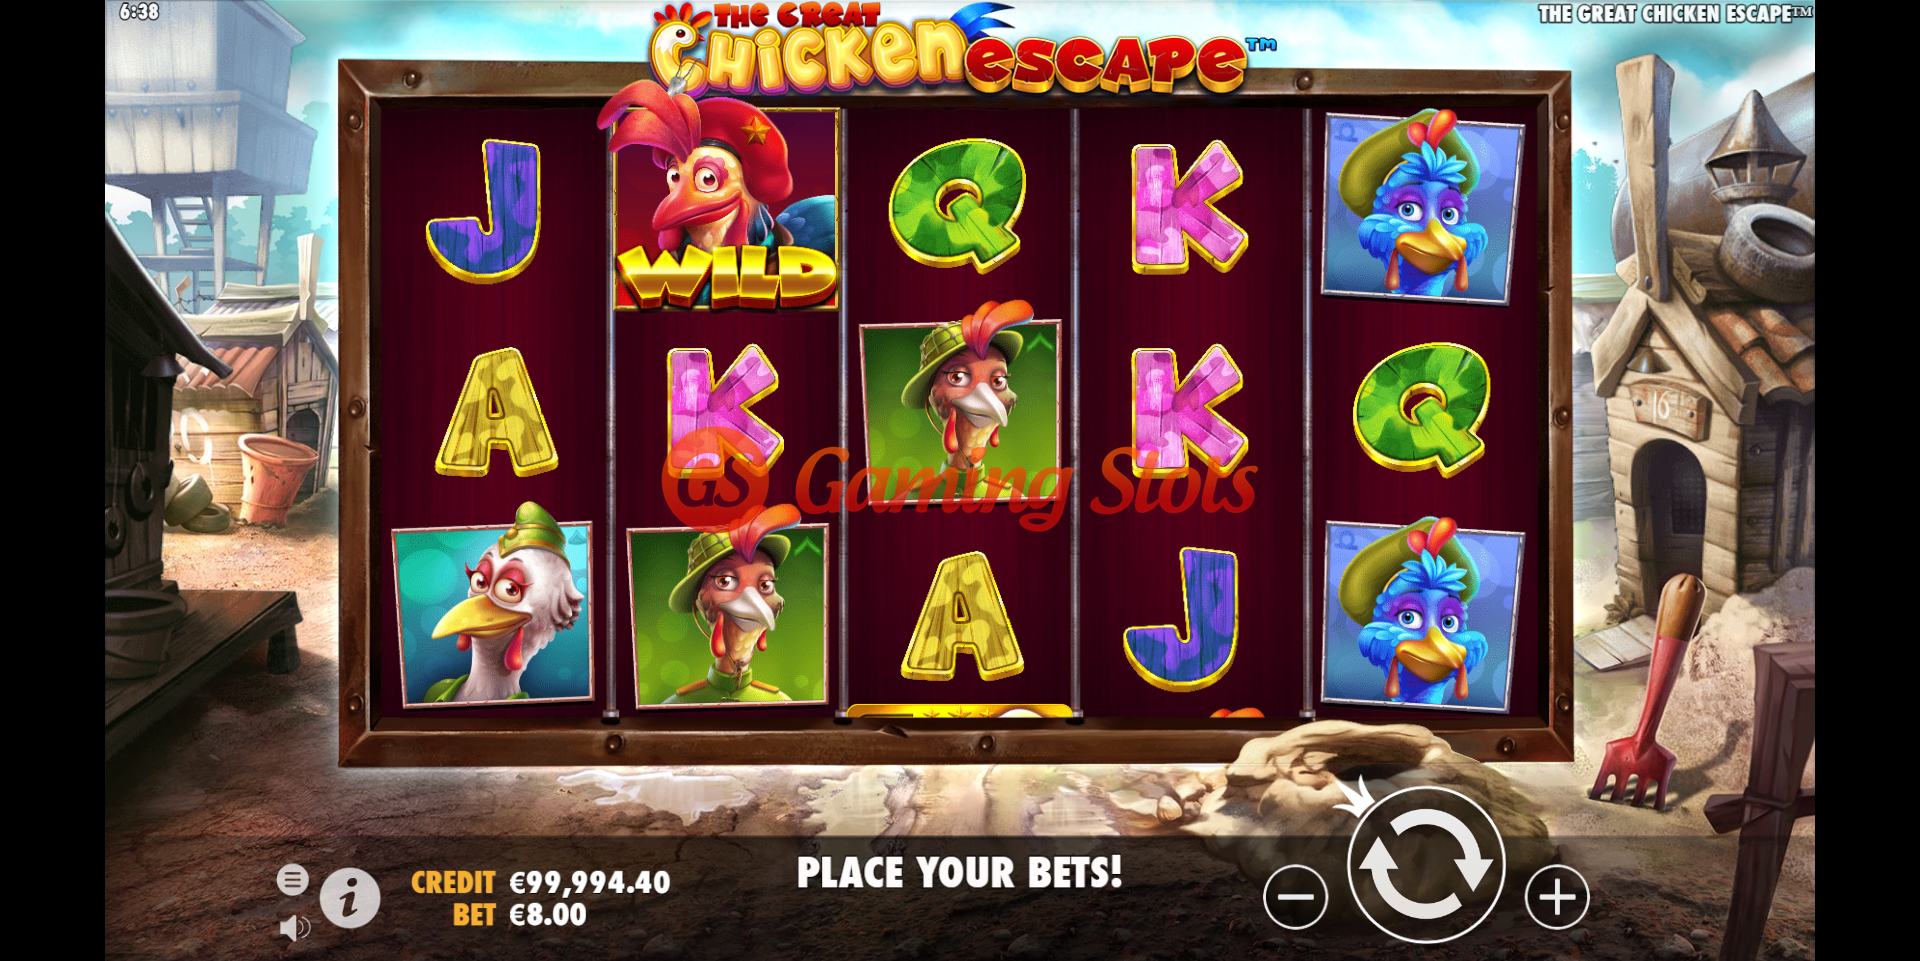 Base Game for The Great Chicken Escape slot from Pragmatic Play